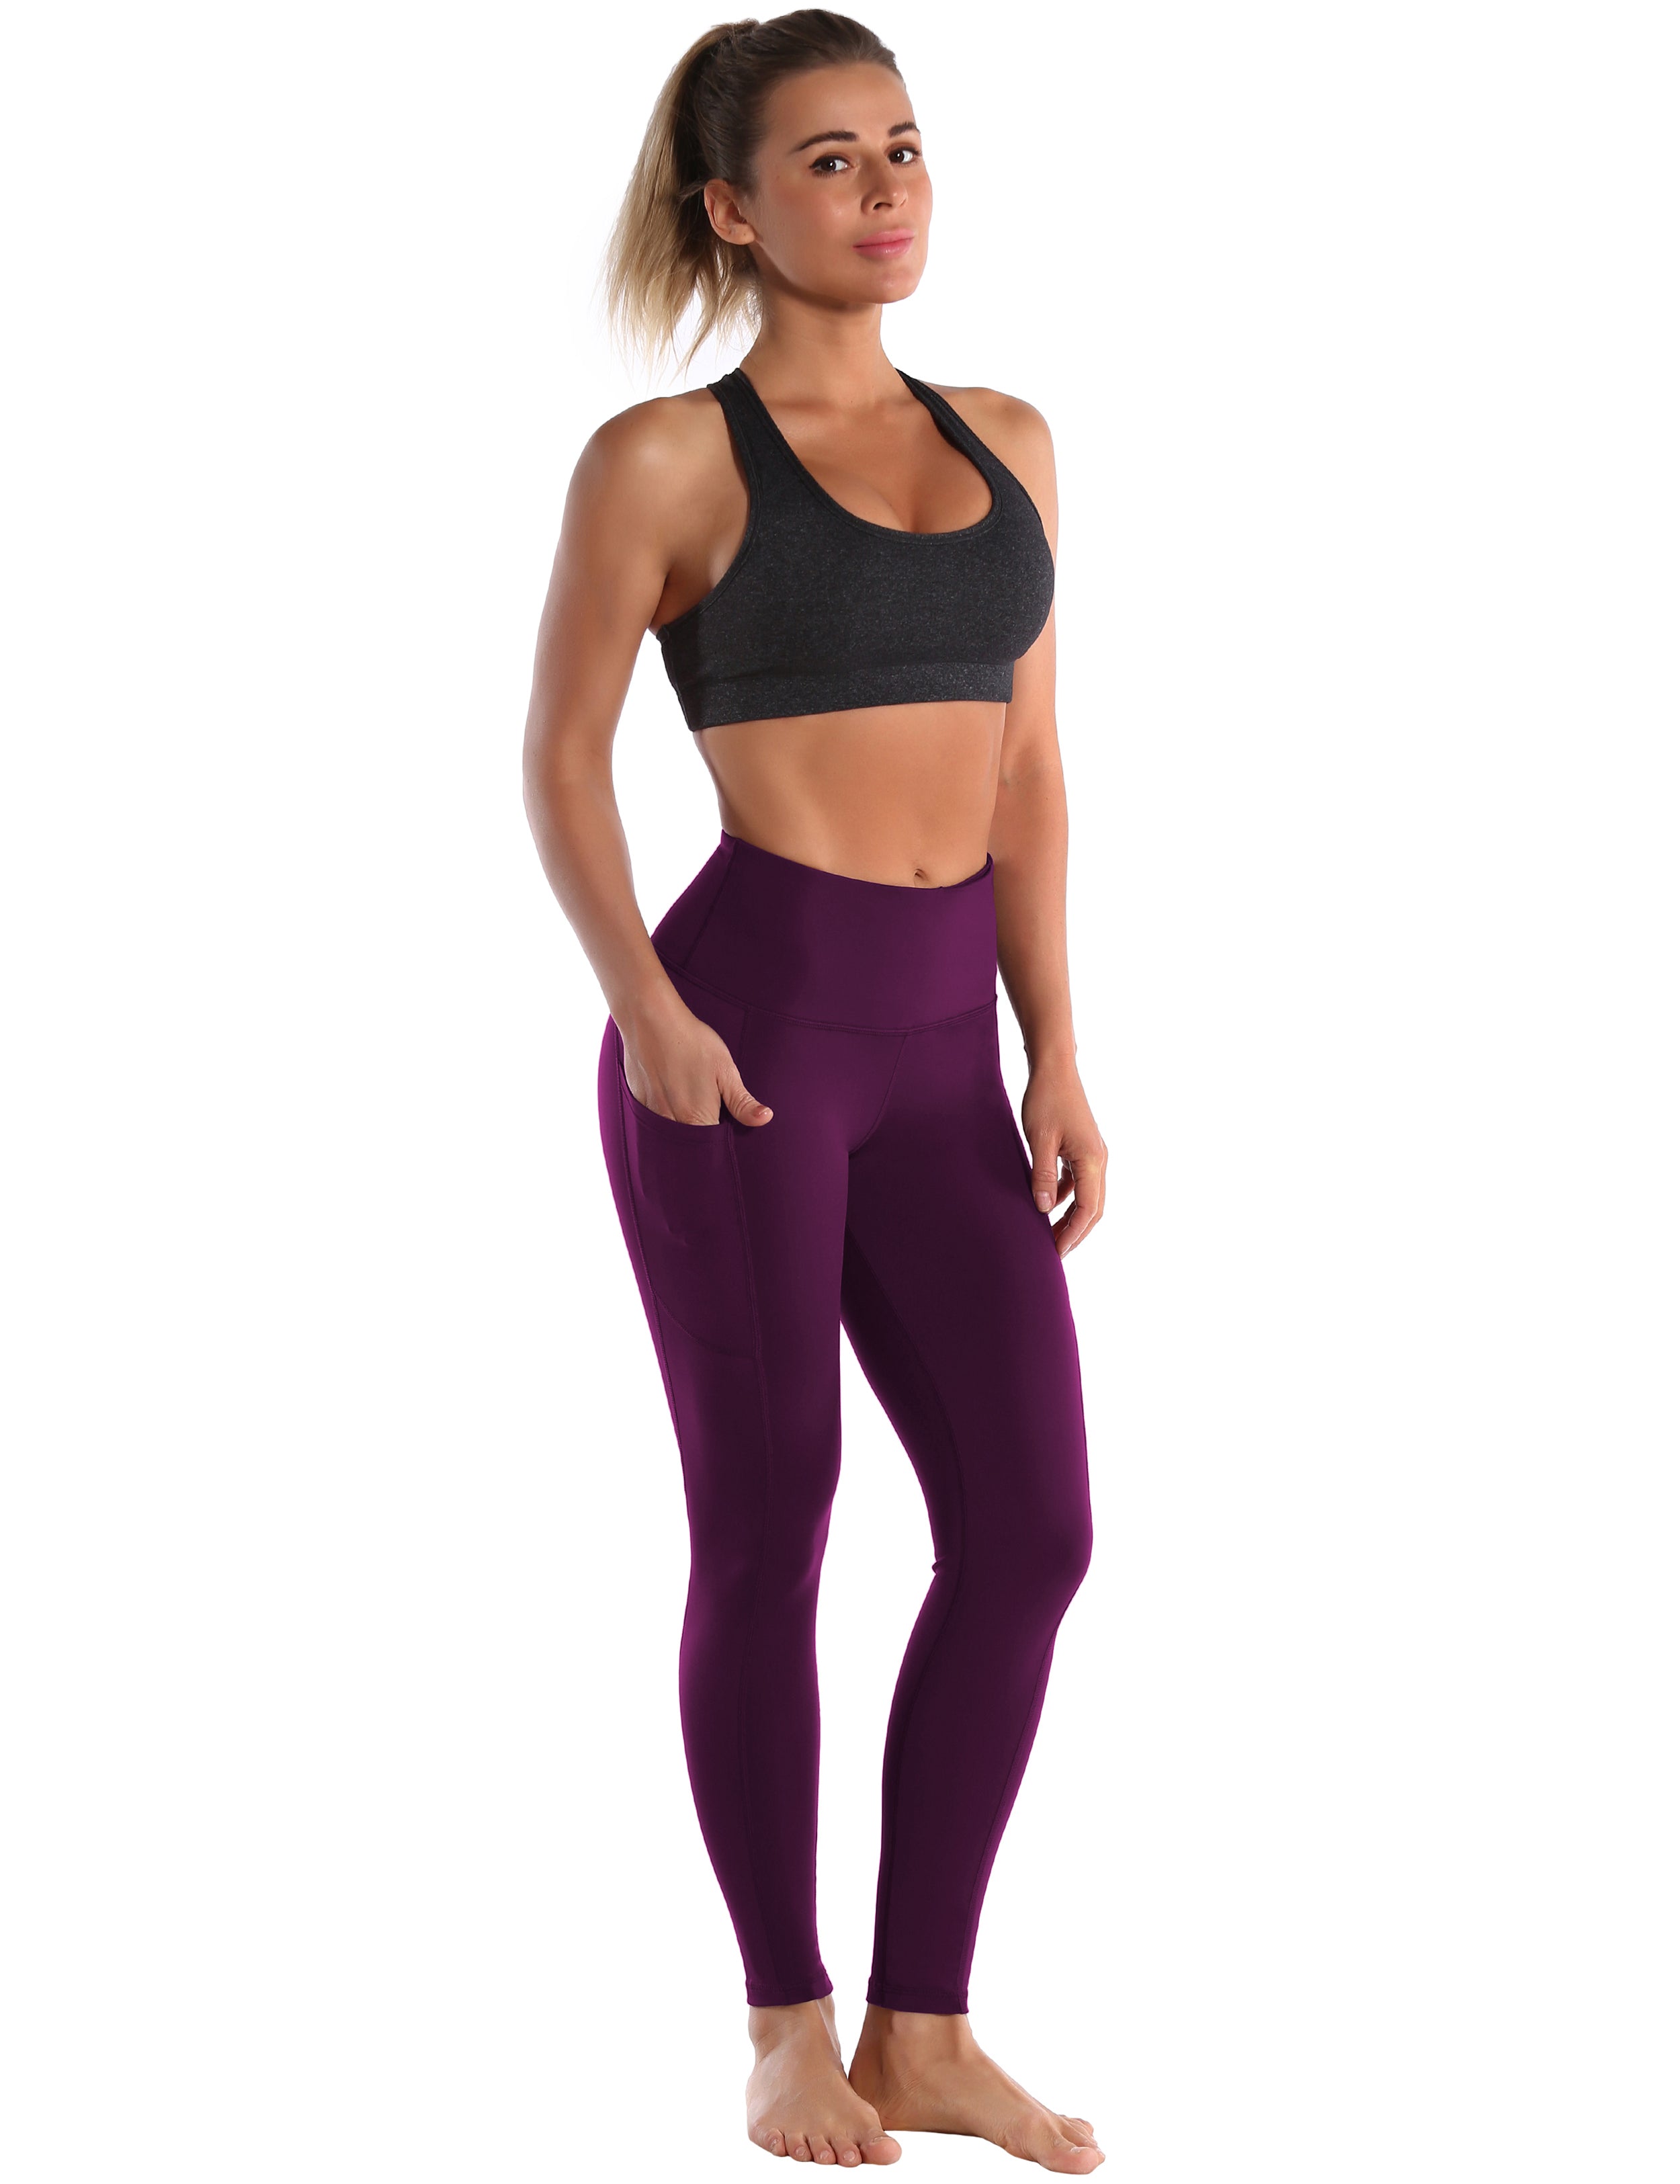 Hip Line Side Pockets Biking Pants grapevine Sexy Hip Line Side Pockets 75%Nylon/25%Spandex Fabric doesn't attract lint easily 4-way stretch No see-through Moisture-wicking Tummy control Inner pocket Two lengths